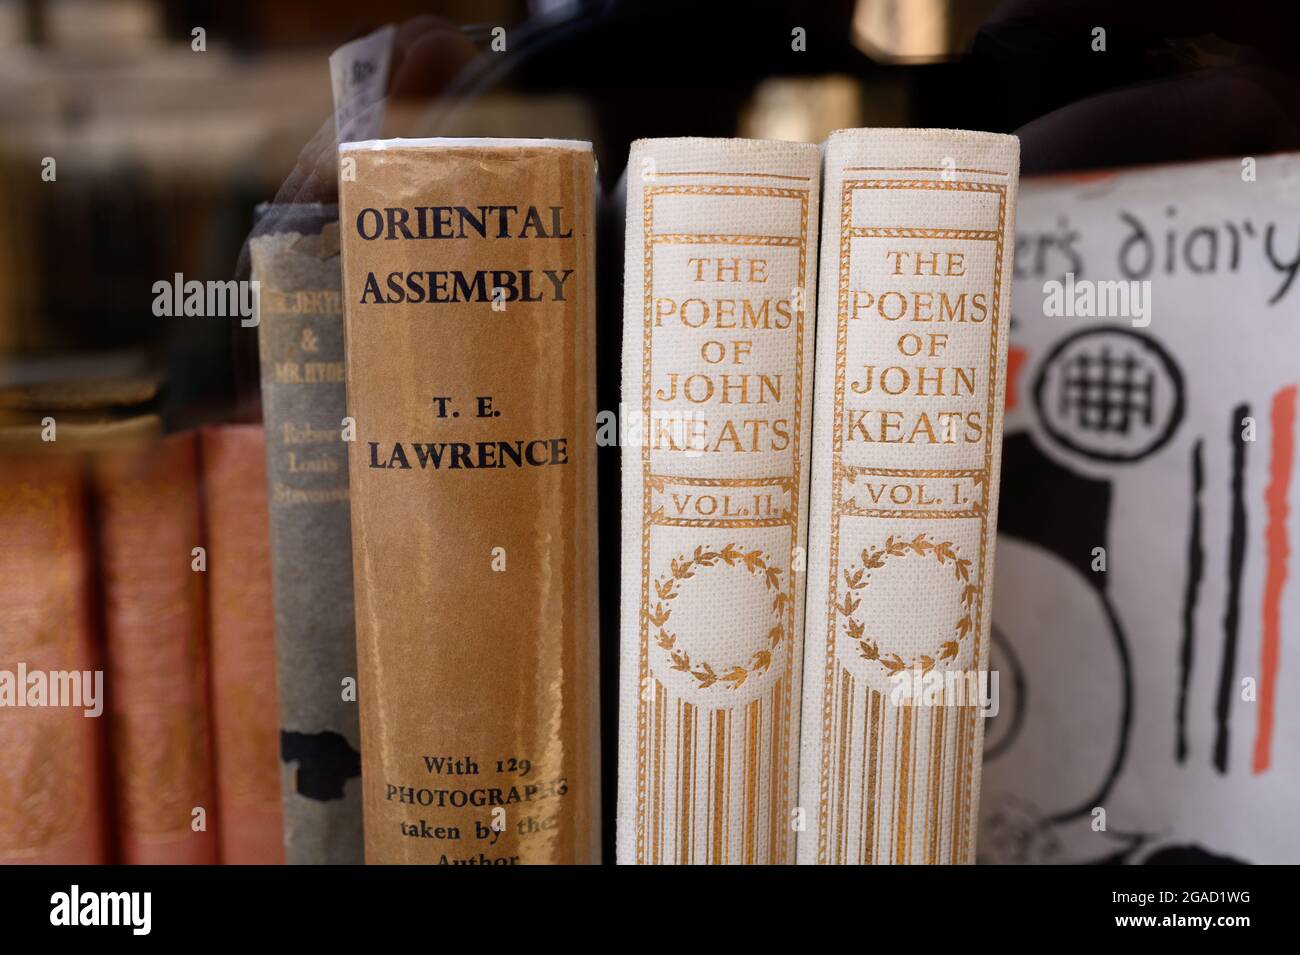 The Poems of John Keats books plus Oriental Assembly by T.E. Lawrence in a shop window. Stock Photo